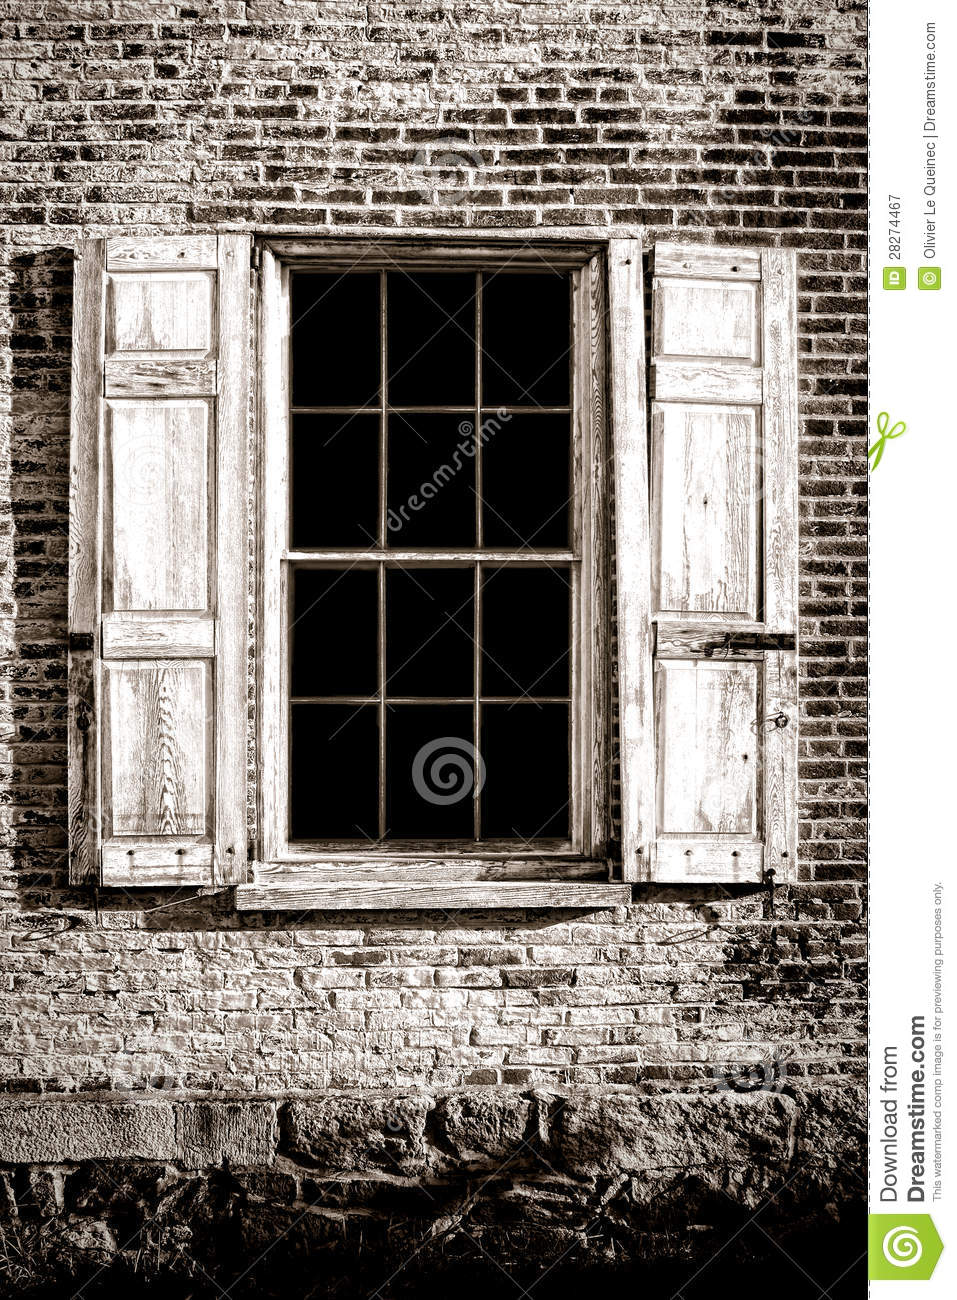 Old Window And Wood Shutters On Ancient Brick Wall Royalty Free Stock    